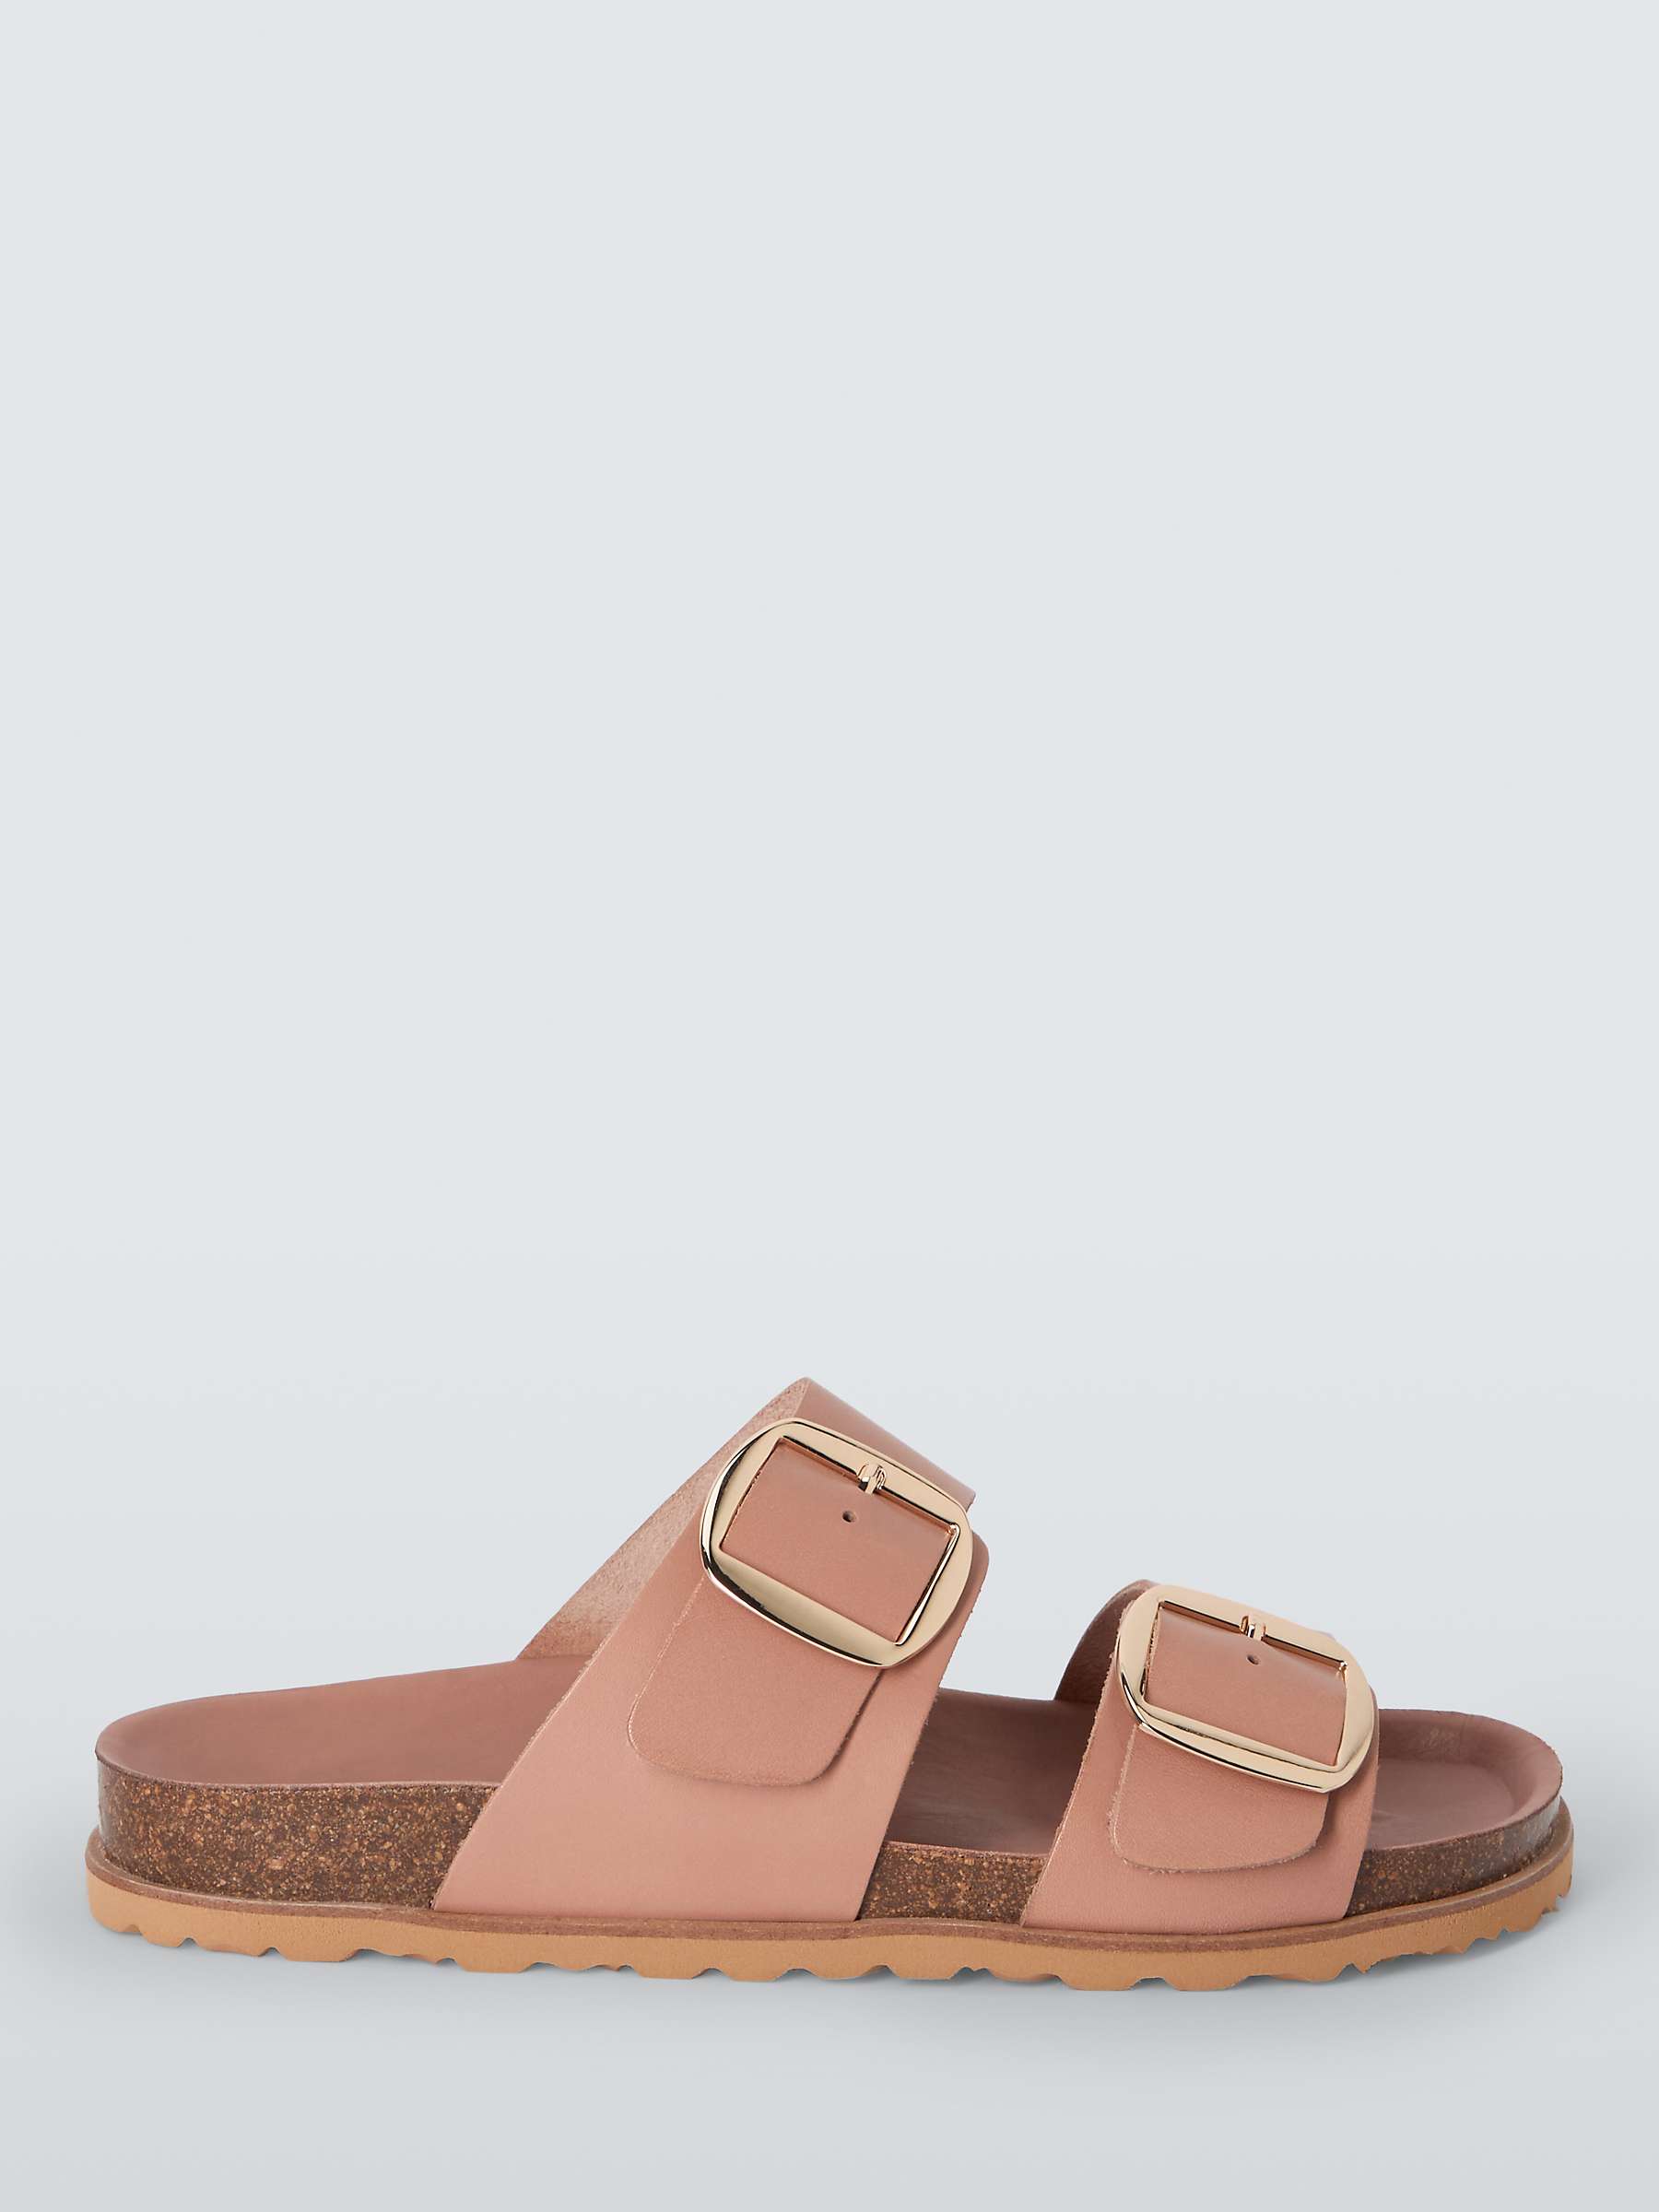 Buy John Lewis Lagos Leather Double Buckle Footbed Sandals, Blush Online at johnlewis.com